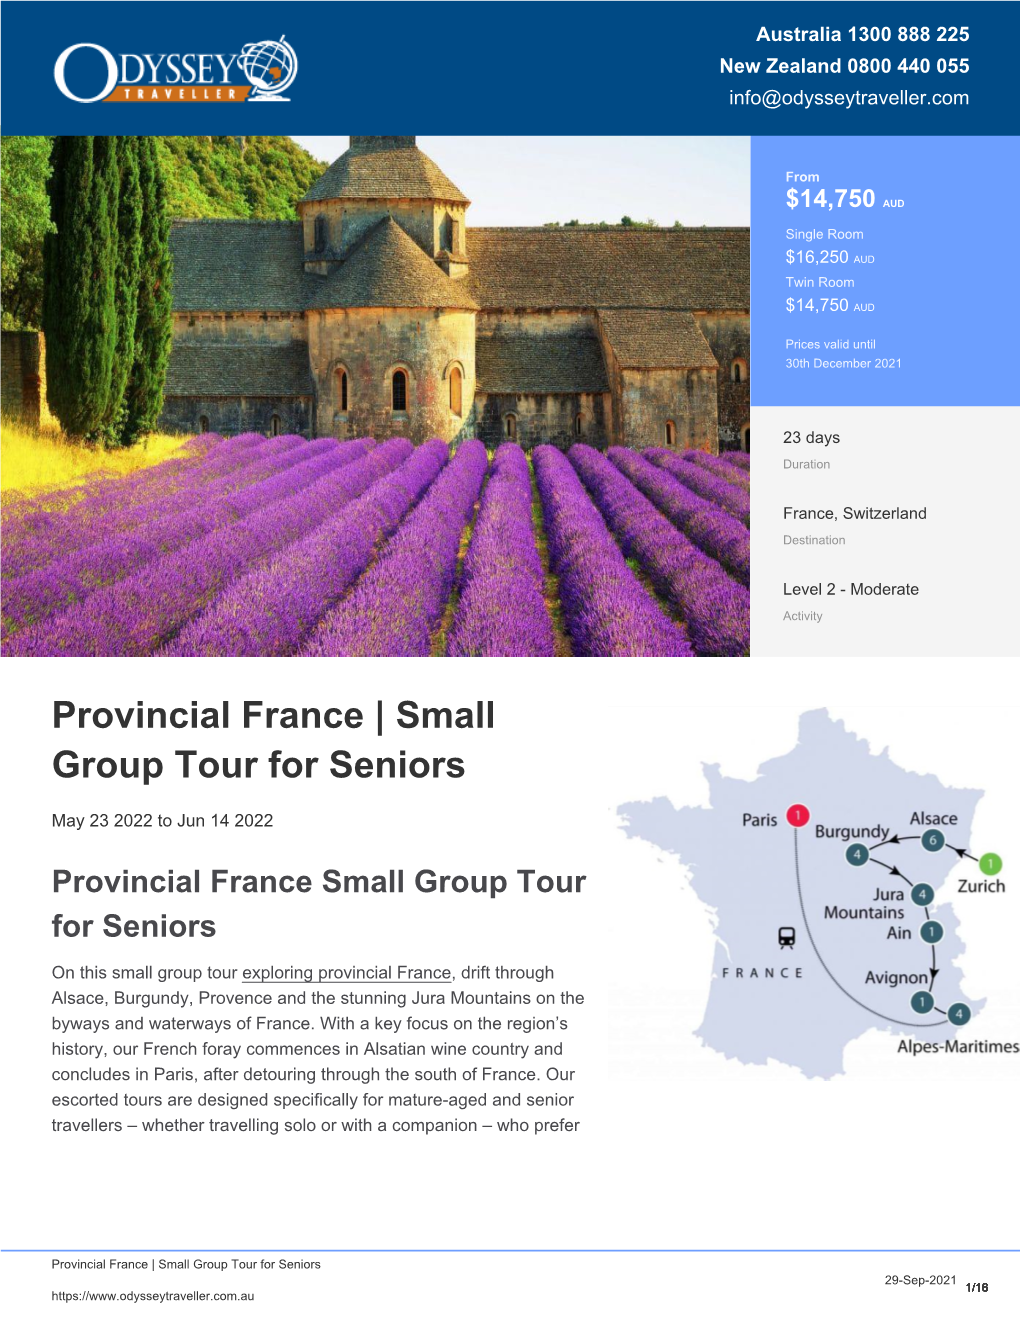 Provincial France Small Group Tour | Odyssey Traveller